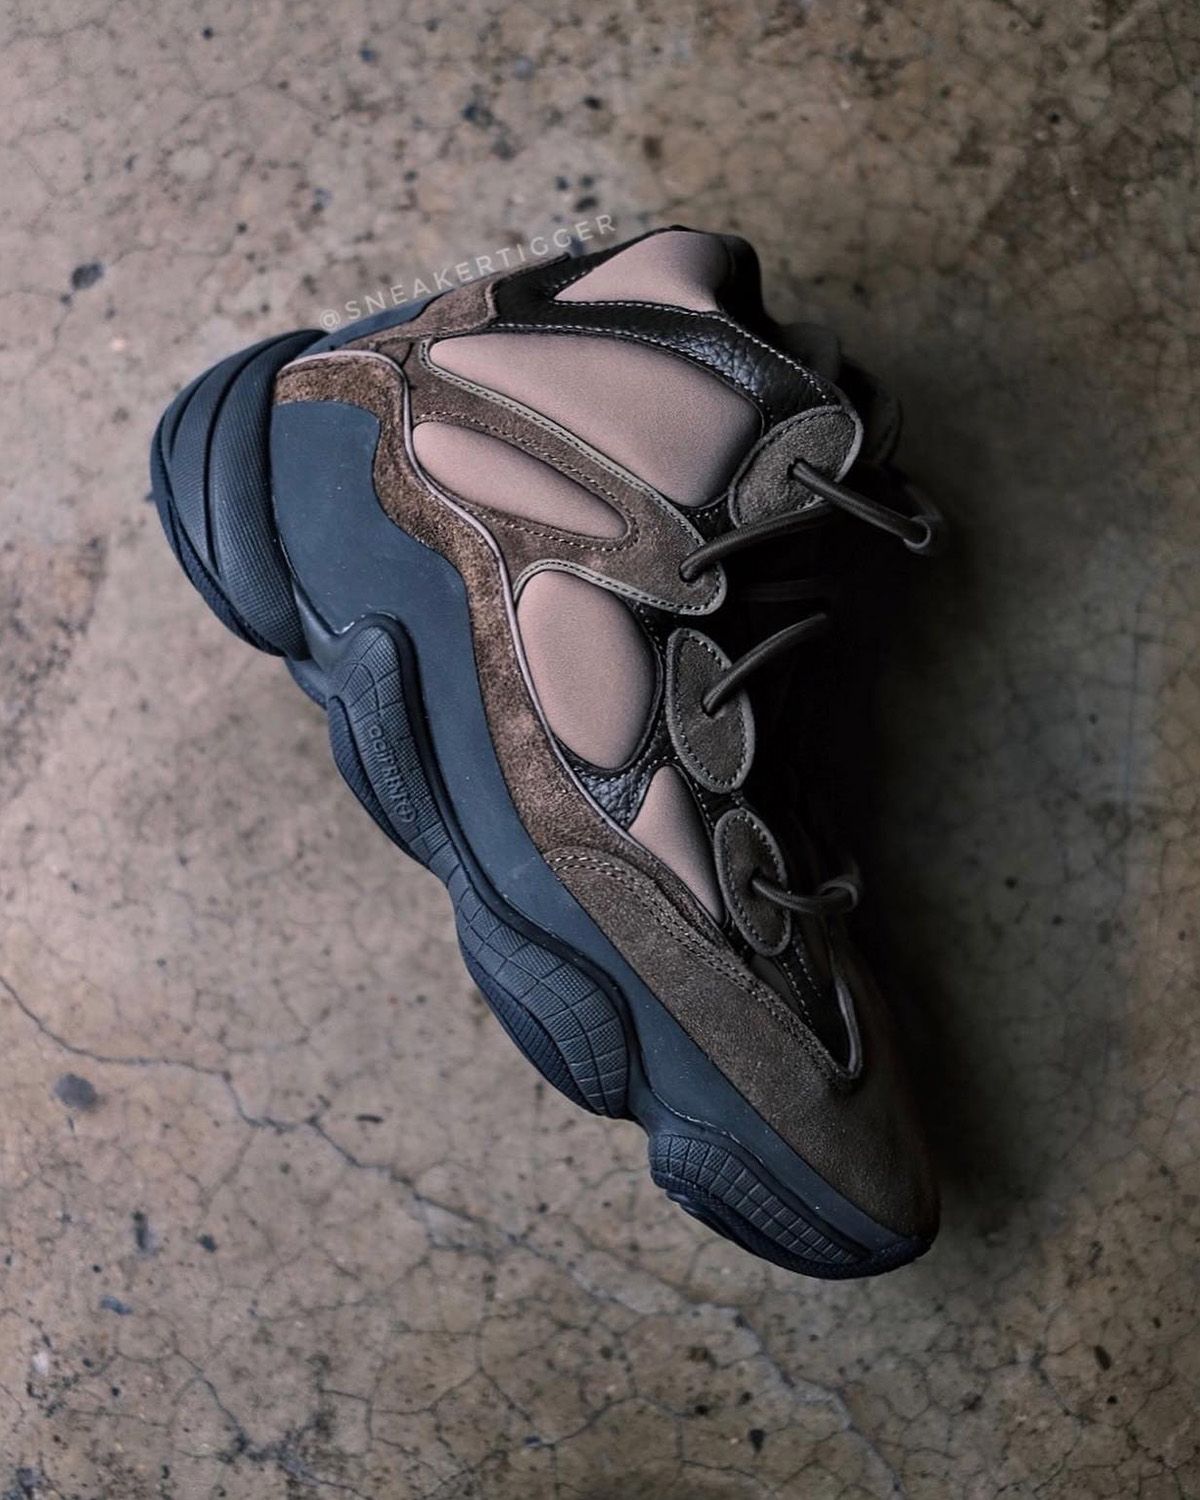 Anyways Murmuring Polar bear The YEEZY 500 High "Taupe Black" Drops October 17 | HOUSE OF HEAT